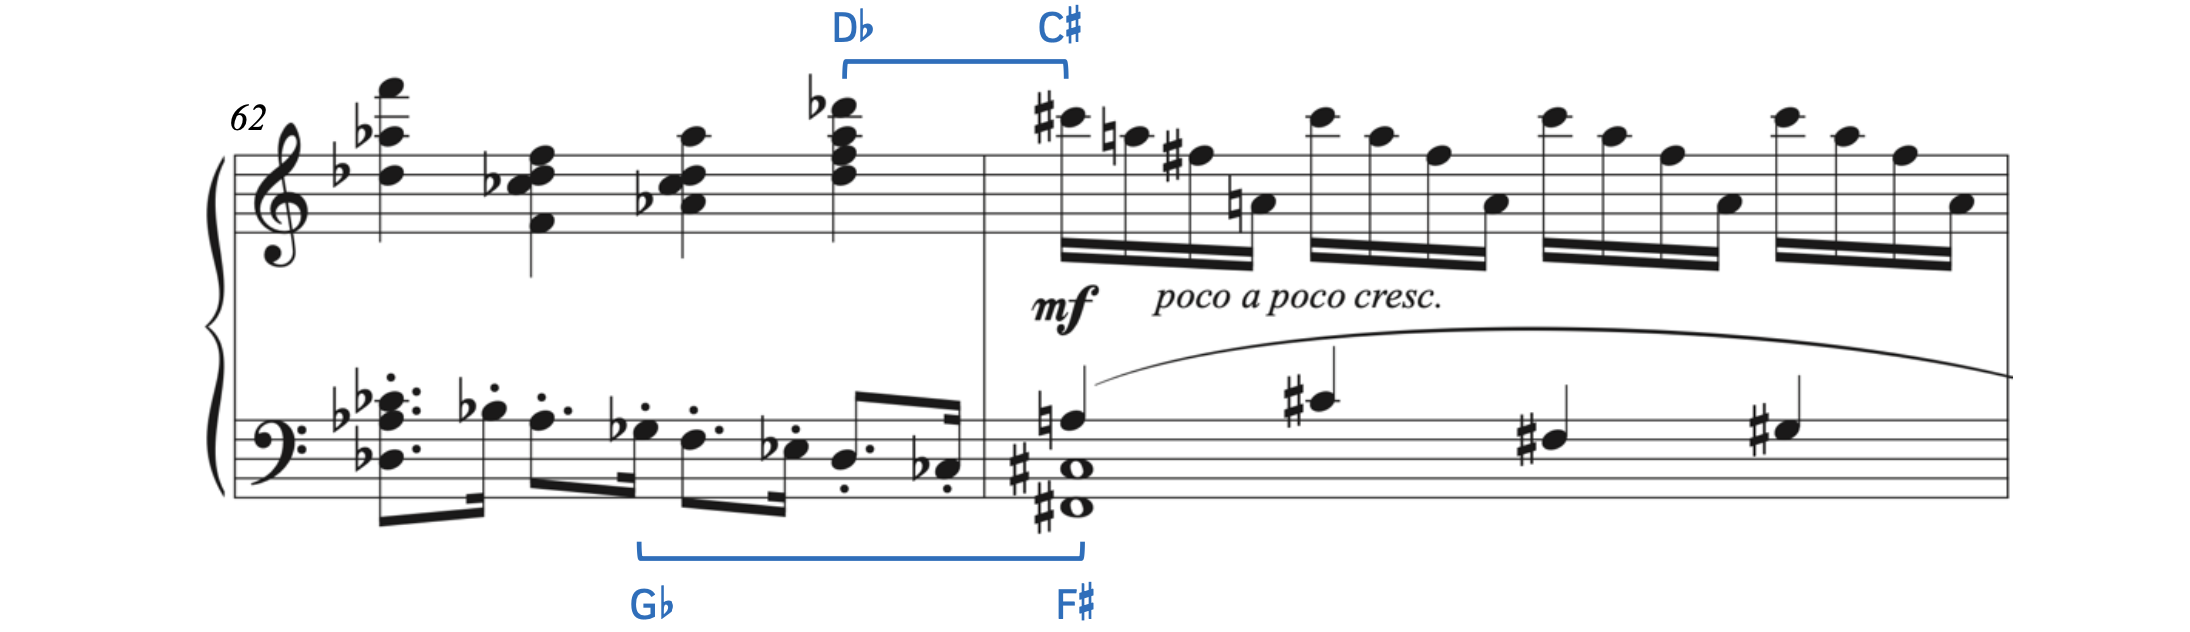 Example from Le Beau's Piano Sonata, op. 8, first movement –Allegro ma non troppo. In the treble clef, there is a D-flat6 that leads directly to C-sharp6 over the bar line. D-flat and C-sharp are enharmonically equivalent. In the bass clef, there is a G-flat3 in the middle of the measure. The lowest note at the start of the next measure is F-sharp2. G-flat and F-sharp are enharmonically equivalent.